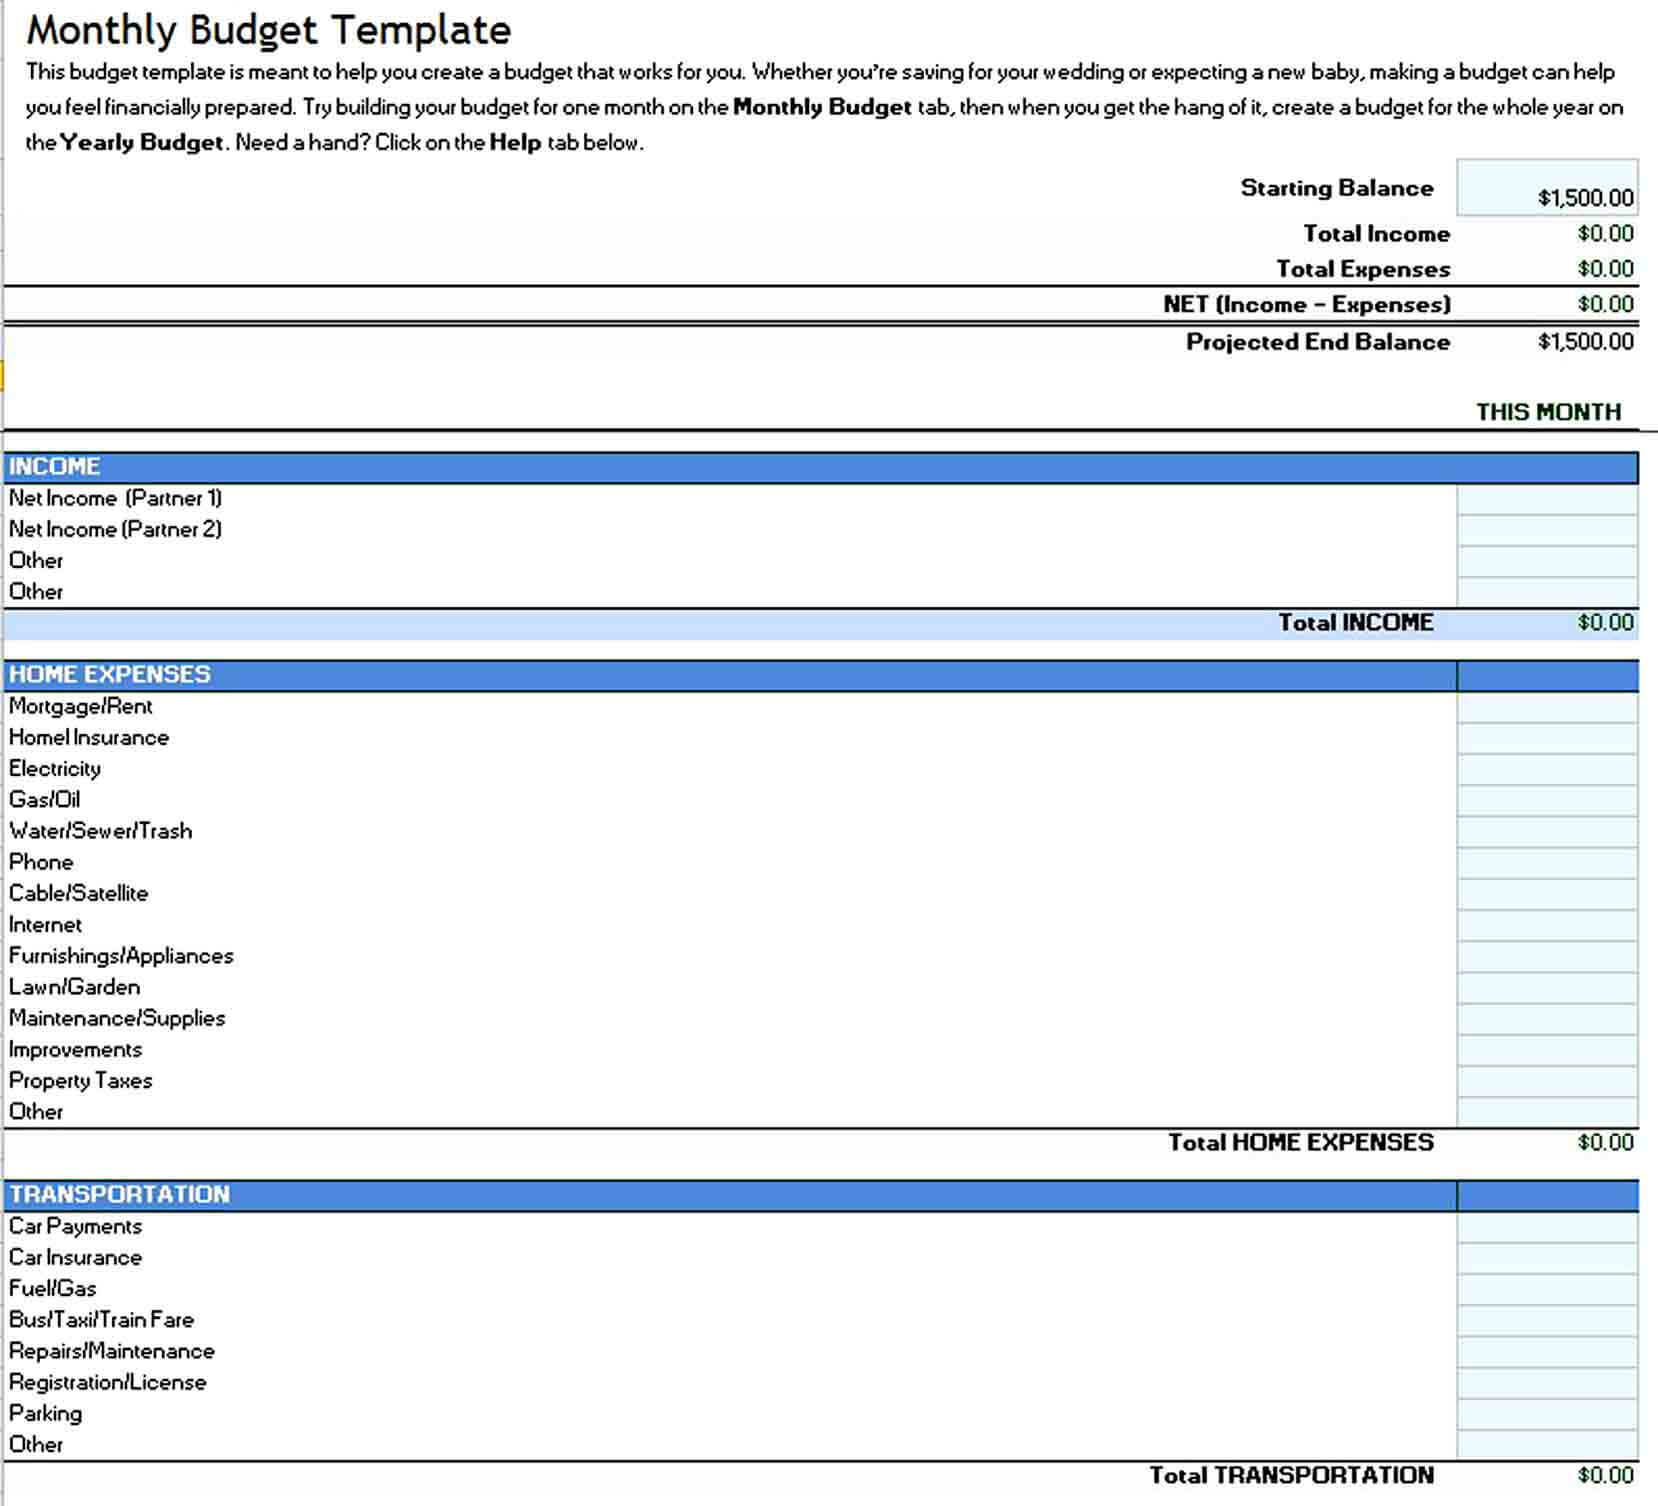 Excel business budget template  With Regard To Lawn Care Business Budget Template For Lawn Care Business Budget Template